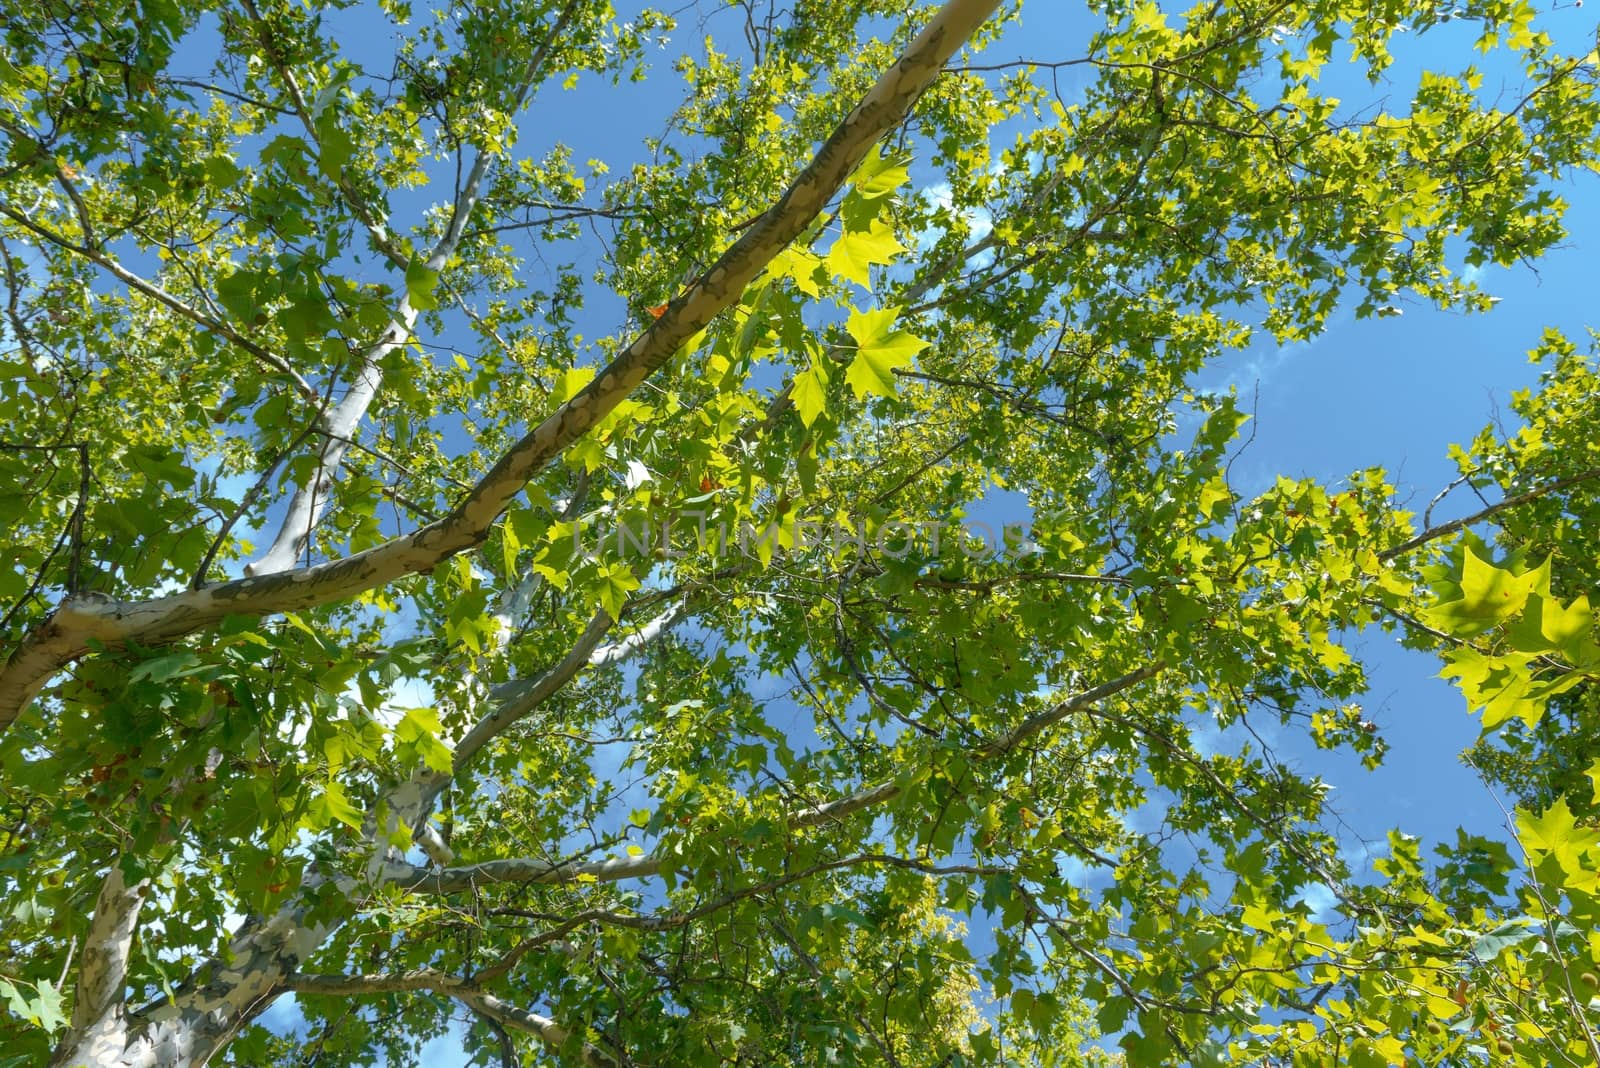 Green leaves of a tree in vibrant sunlight